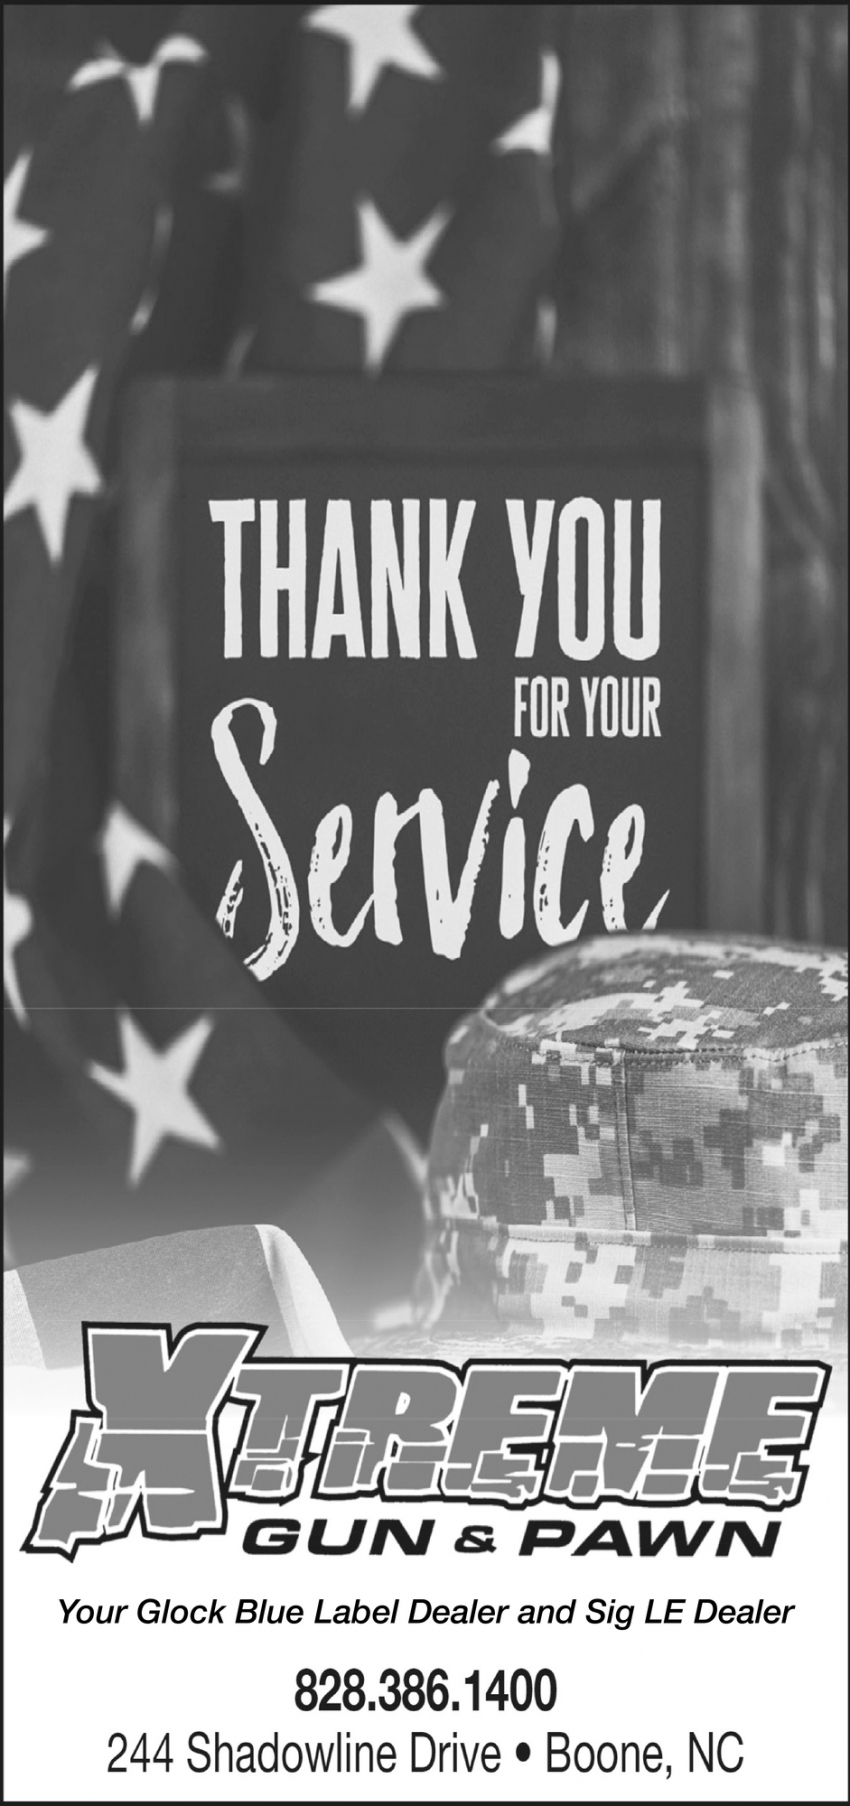 Thank You For Your Service,